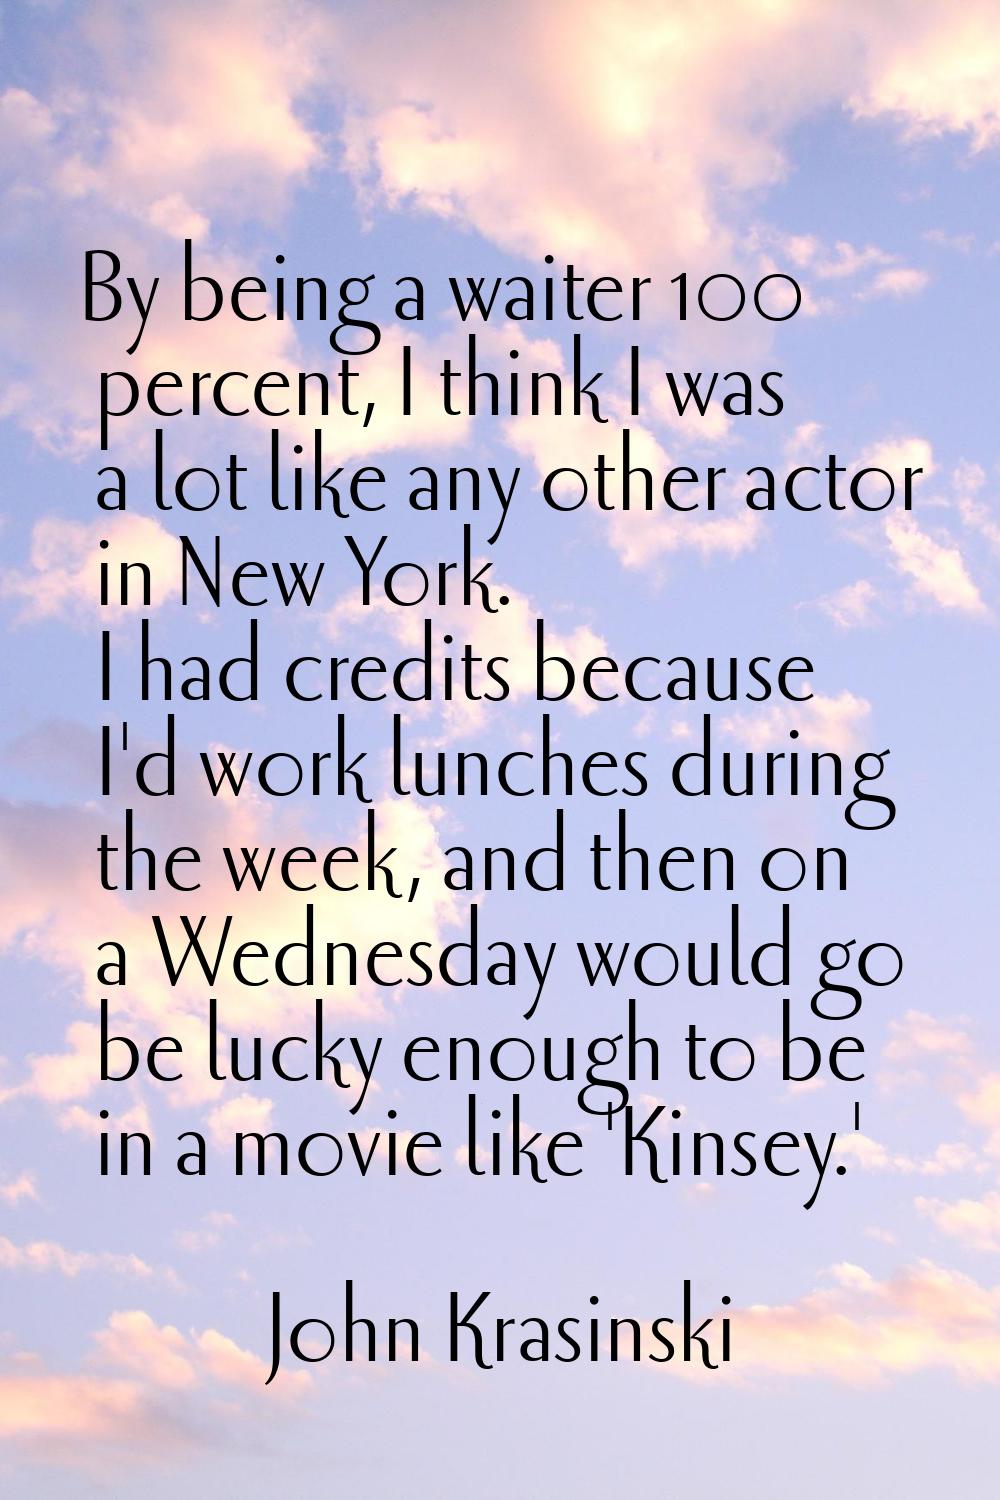 By being a waiter 100 percent, I think I was a lot like any other actor in New York. I had credits 